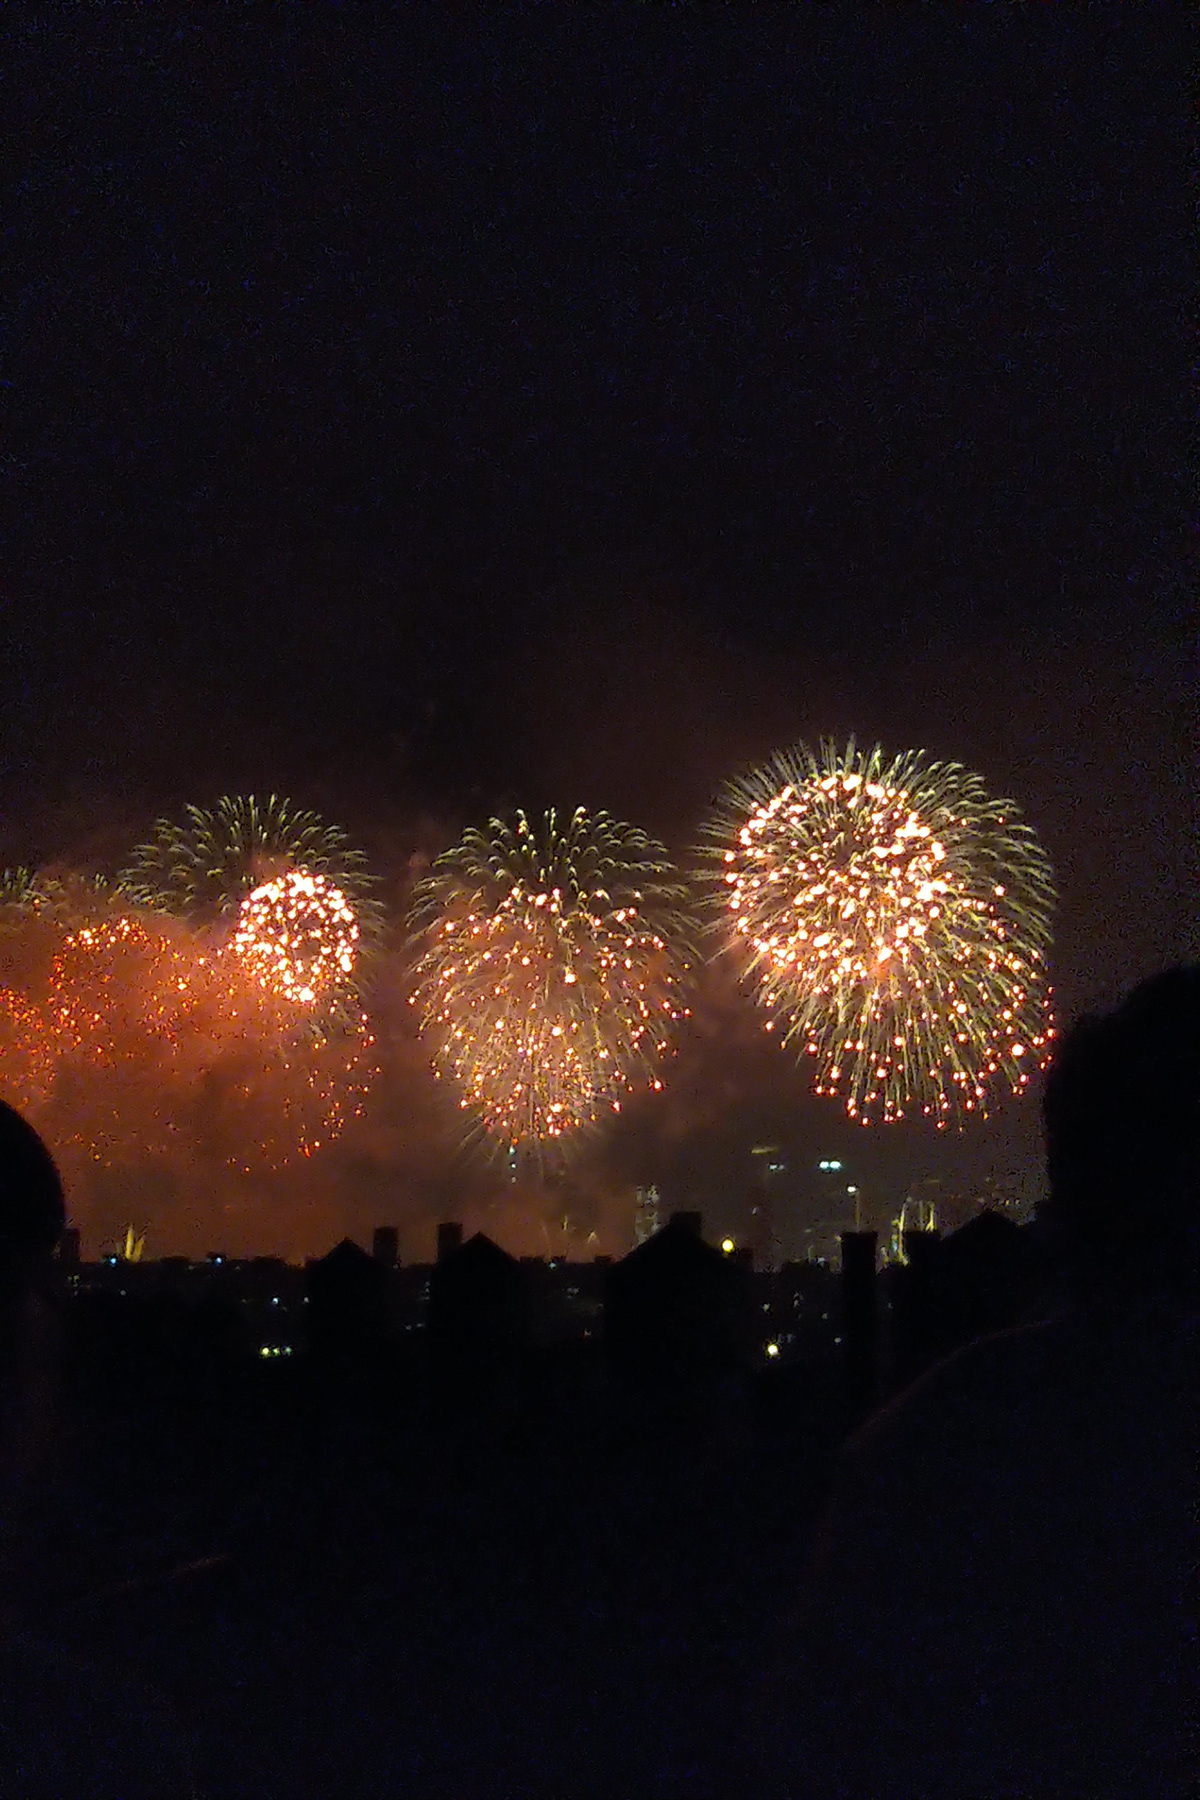 July 4th fireworks in NYC